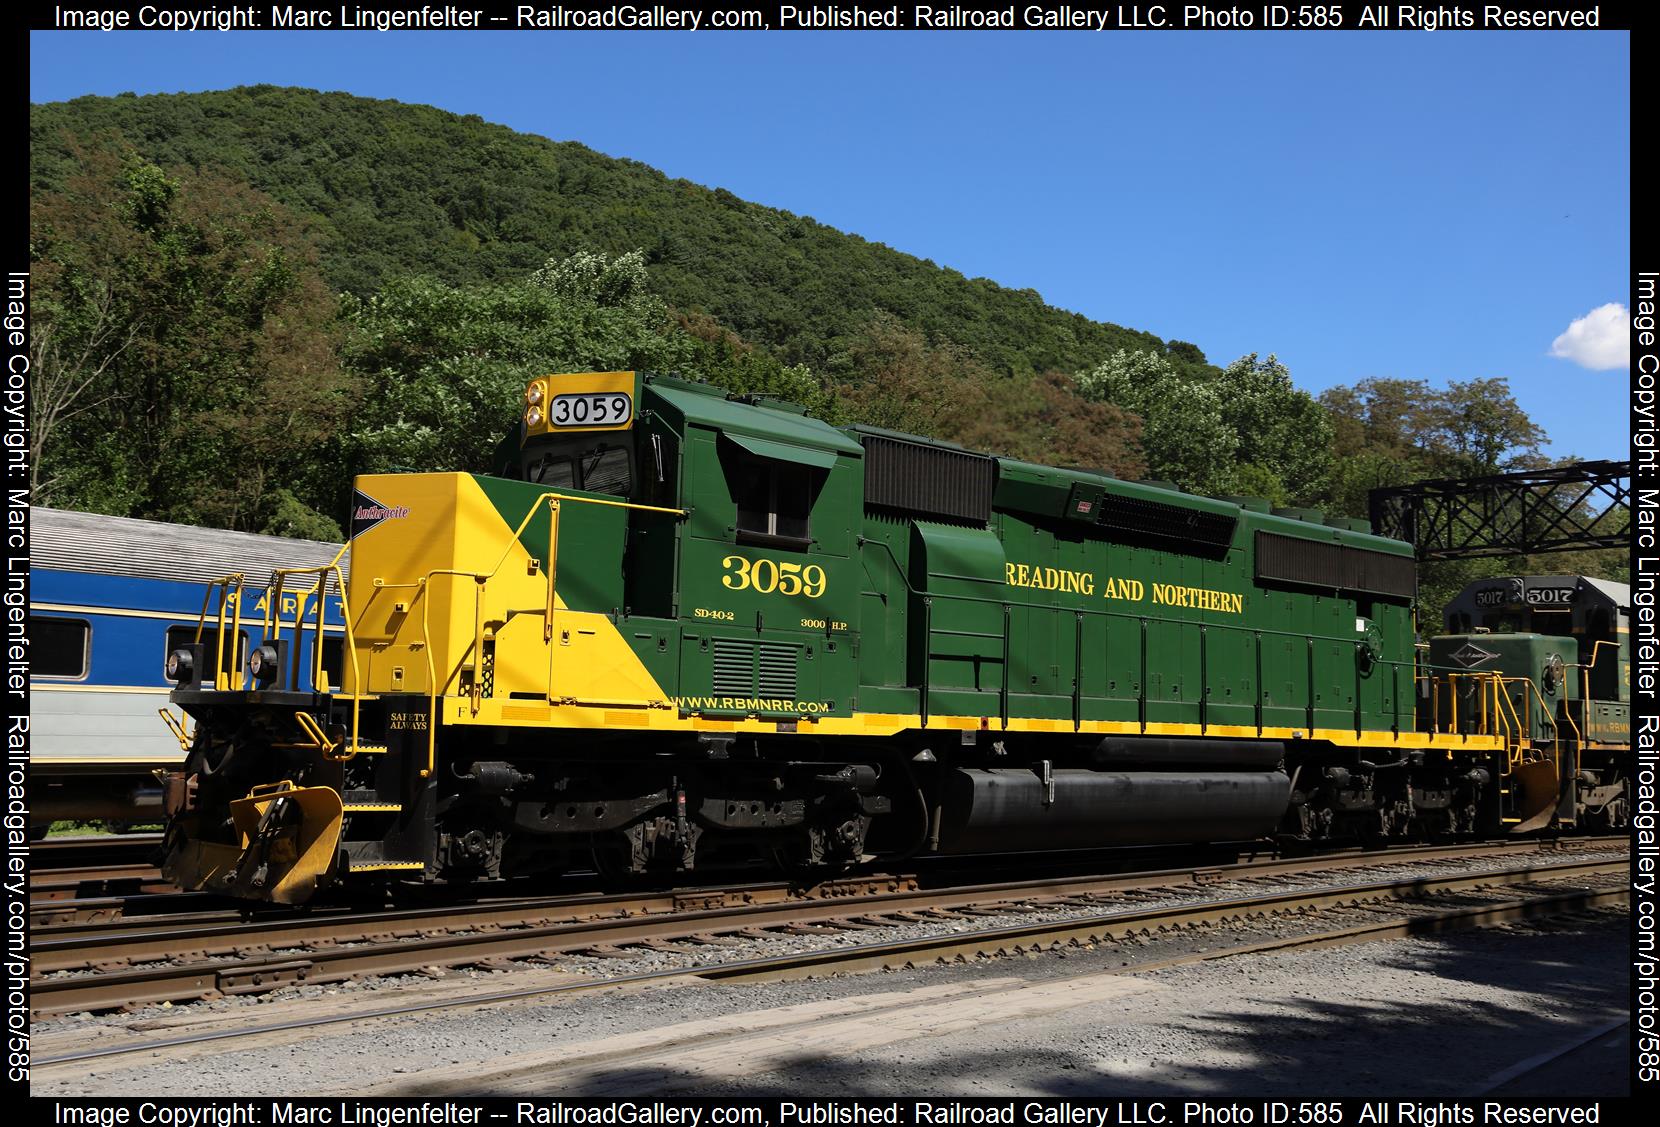 R&N 3059 is a class EMD SD40-2 and  is pictured in Port Clinton, Pennsylvania, USA.  This was taken along the R&N Mainline on the Reading Blue Mountain and Northern Railroad. Photo Copyright: Marc Lingenfelter uploaded to Railroad Gallery on 01/16/2023. This photograph of R&N 3059 was taken on Friday, August 12, 2022. All Rights Reserved. 